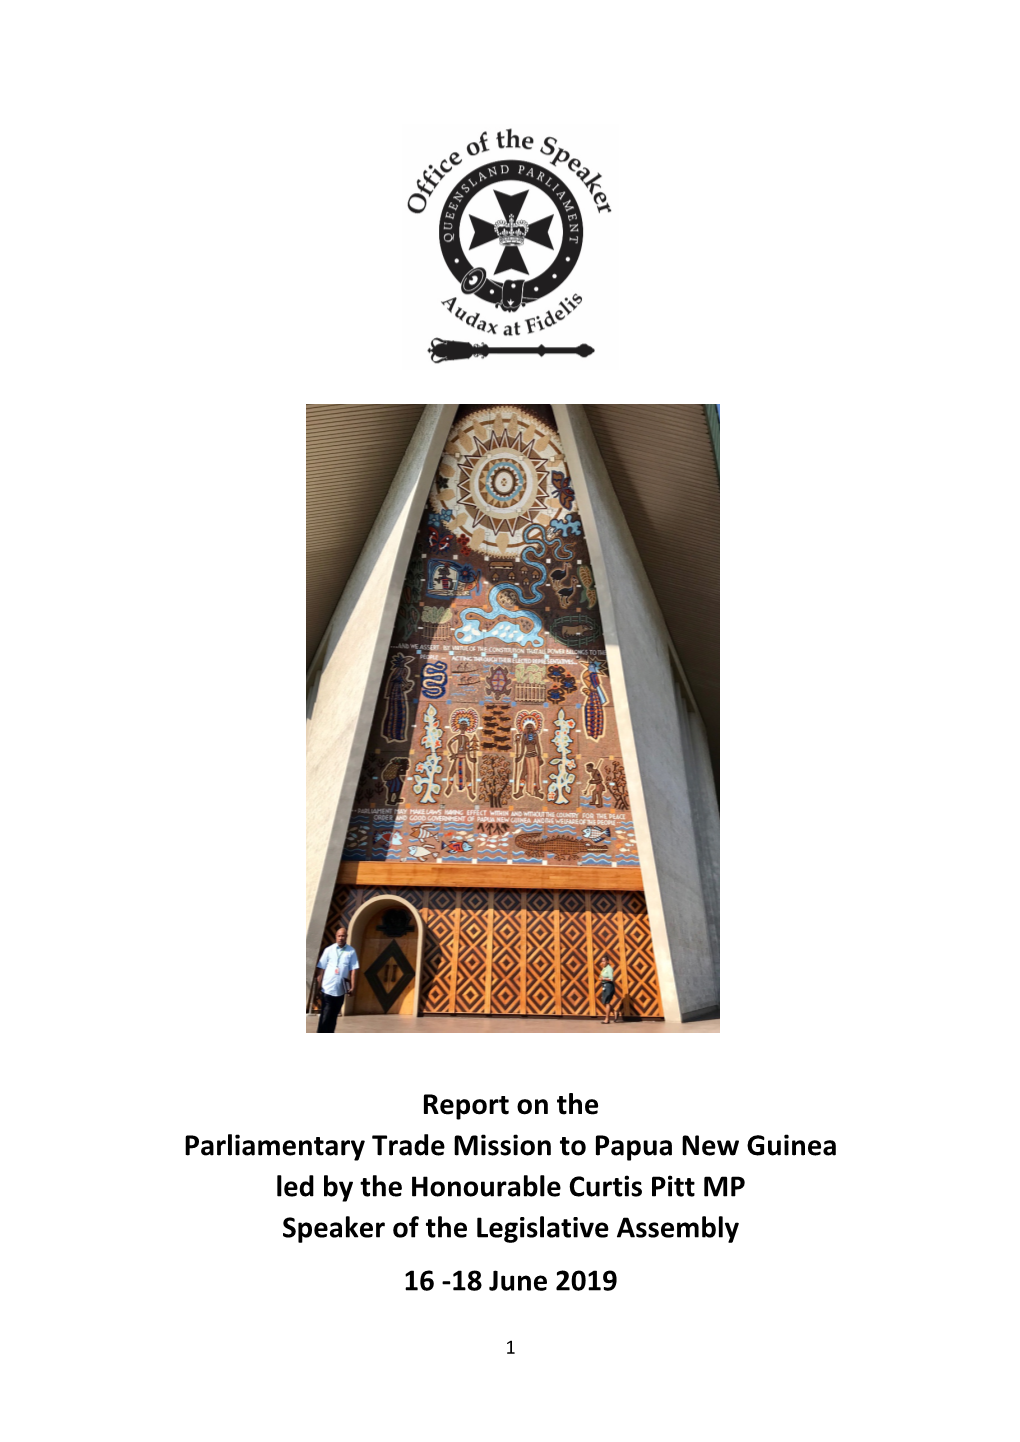 Report on the Parliamentary Trade Mission to Papua New Guinea Led by the Honourable Curtis Pitt MP Speaker of the Legislative Assembly 16 -18 June 2019